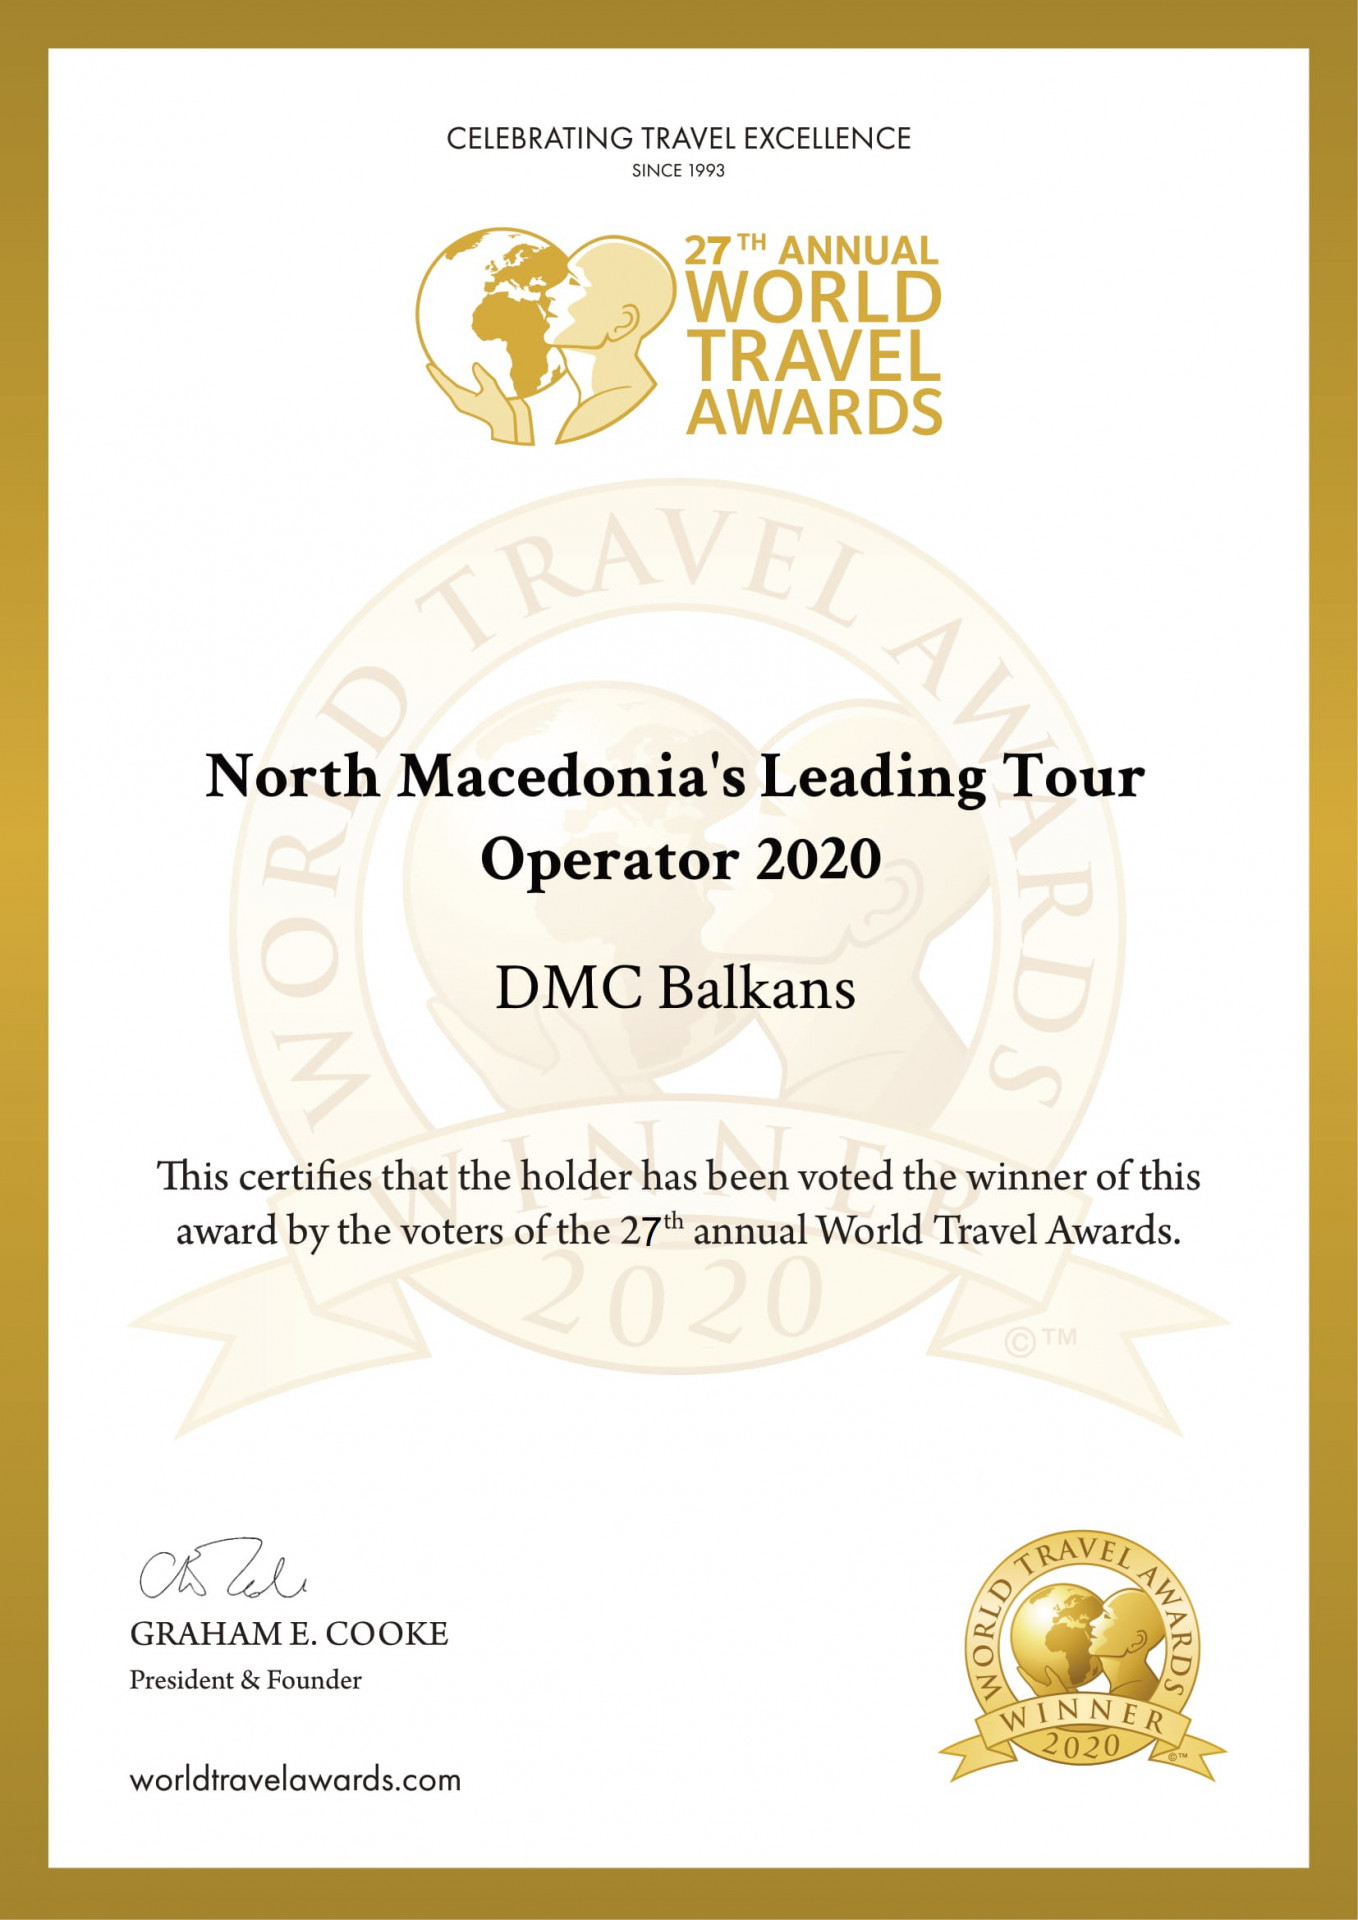 DMC Balkans Travel & Events -Three times in a row the best inbound tour operator for N.Macedonia